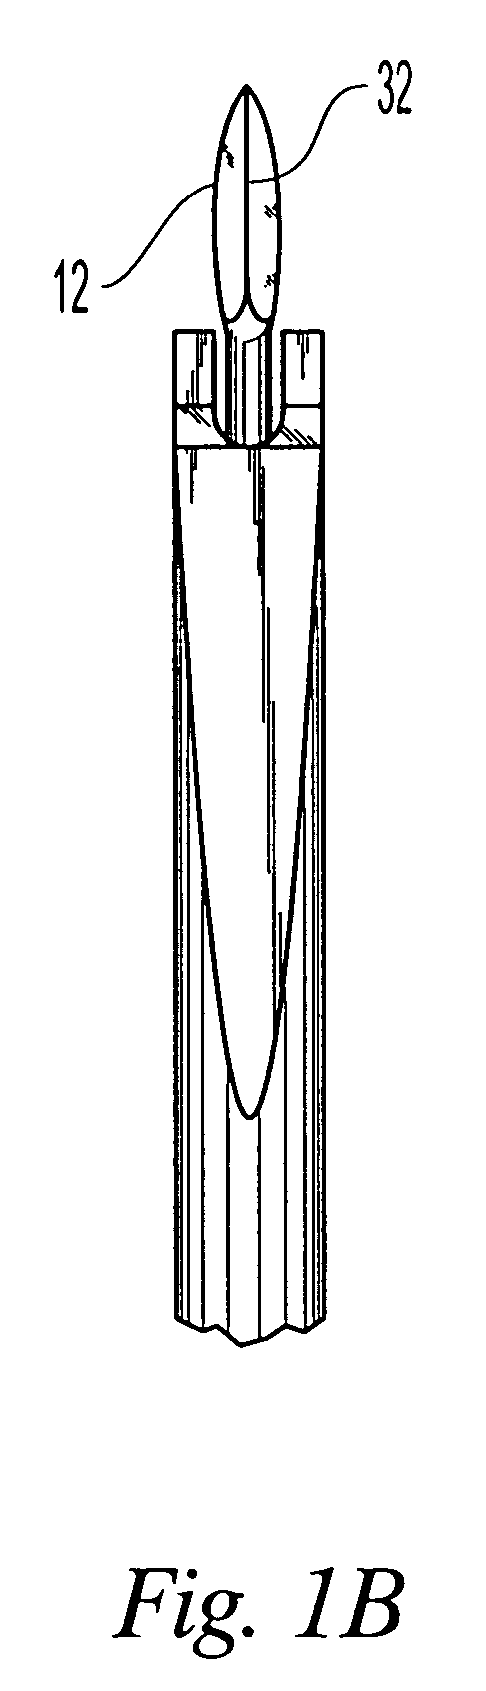 Tools and methods for creating cavities in bone